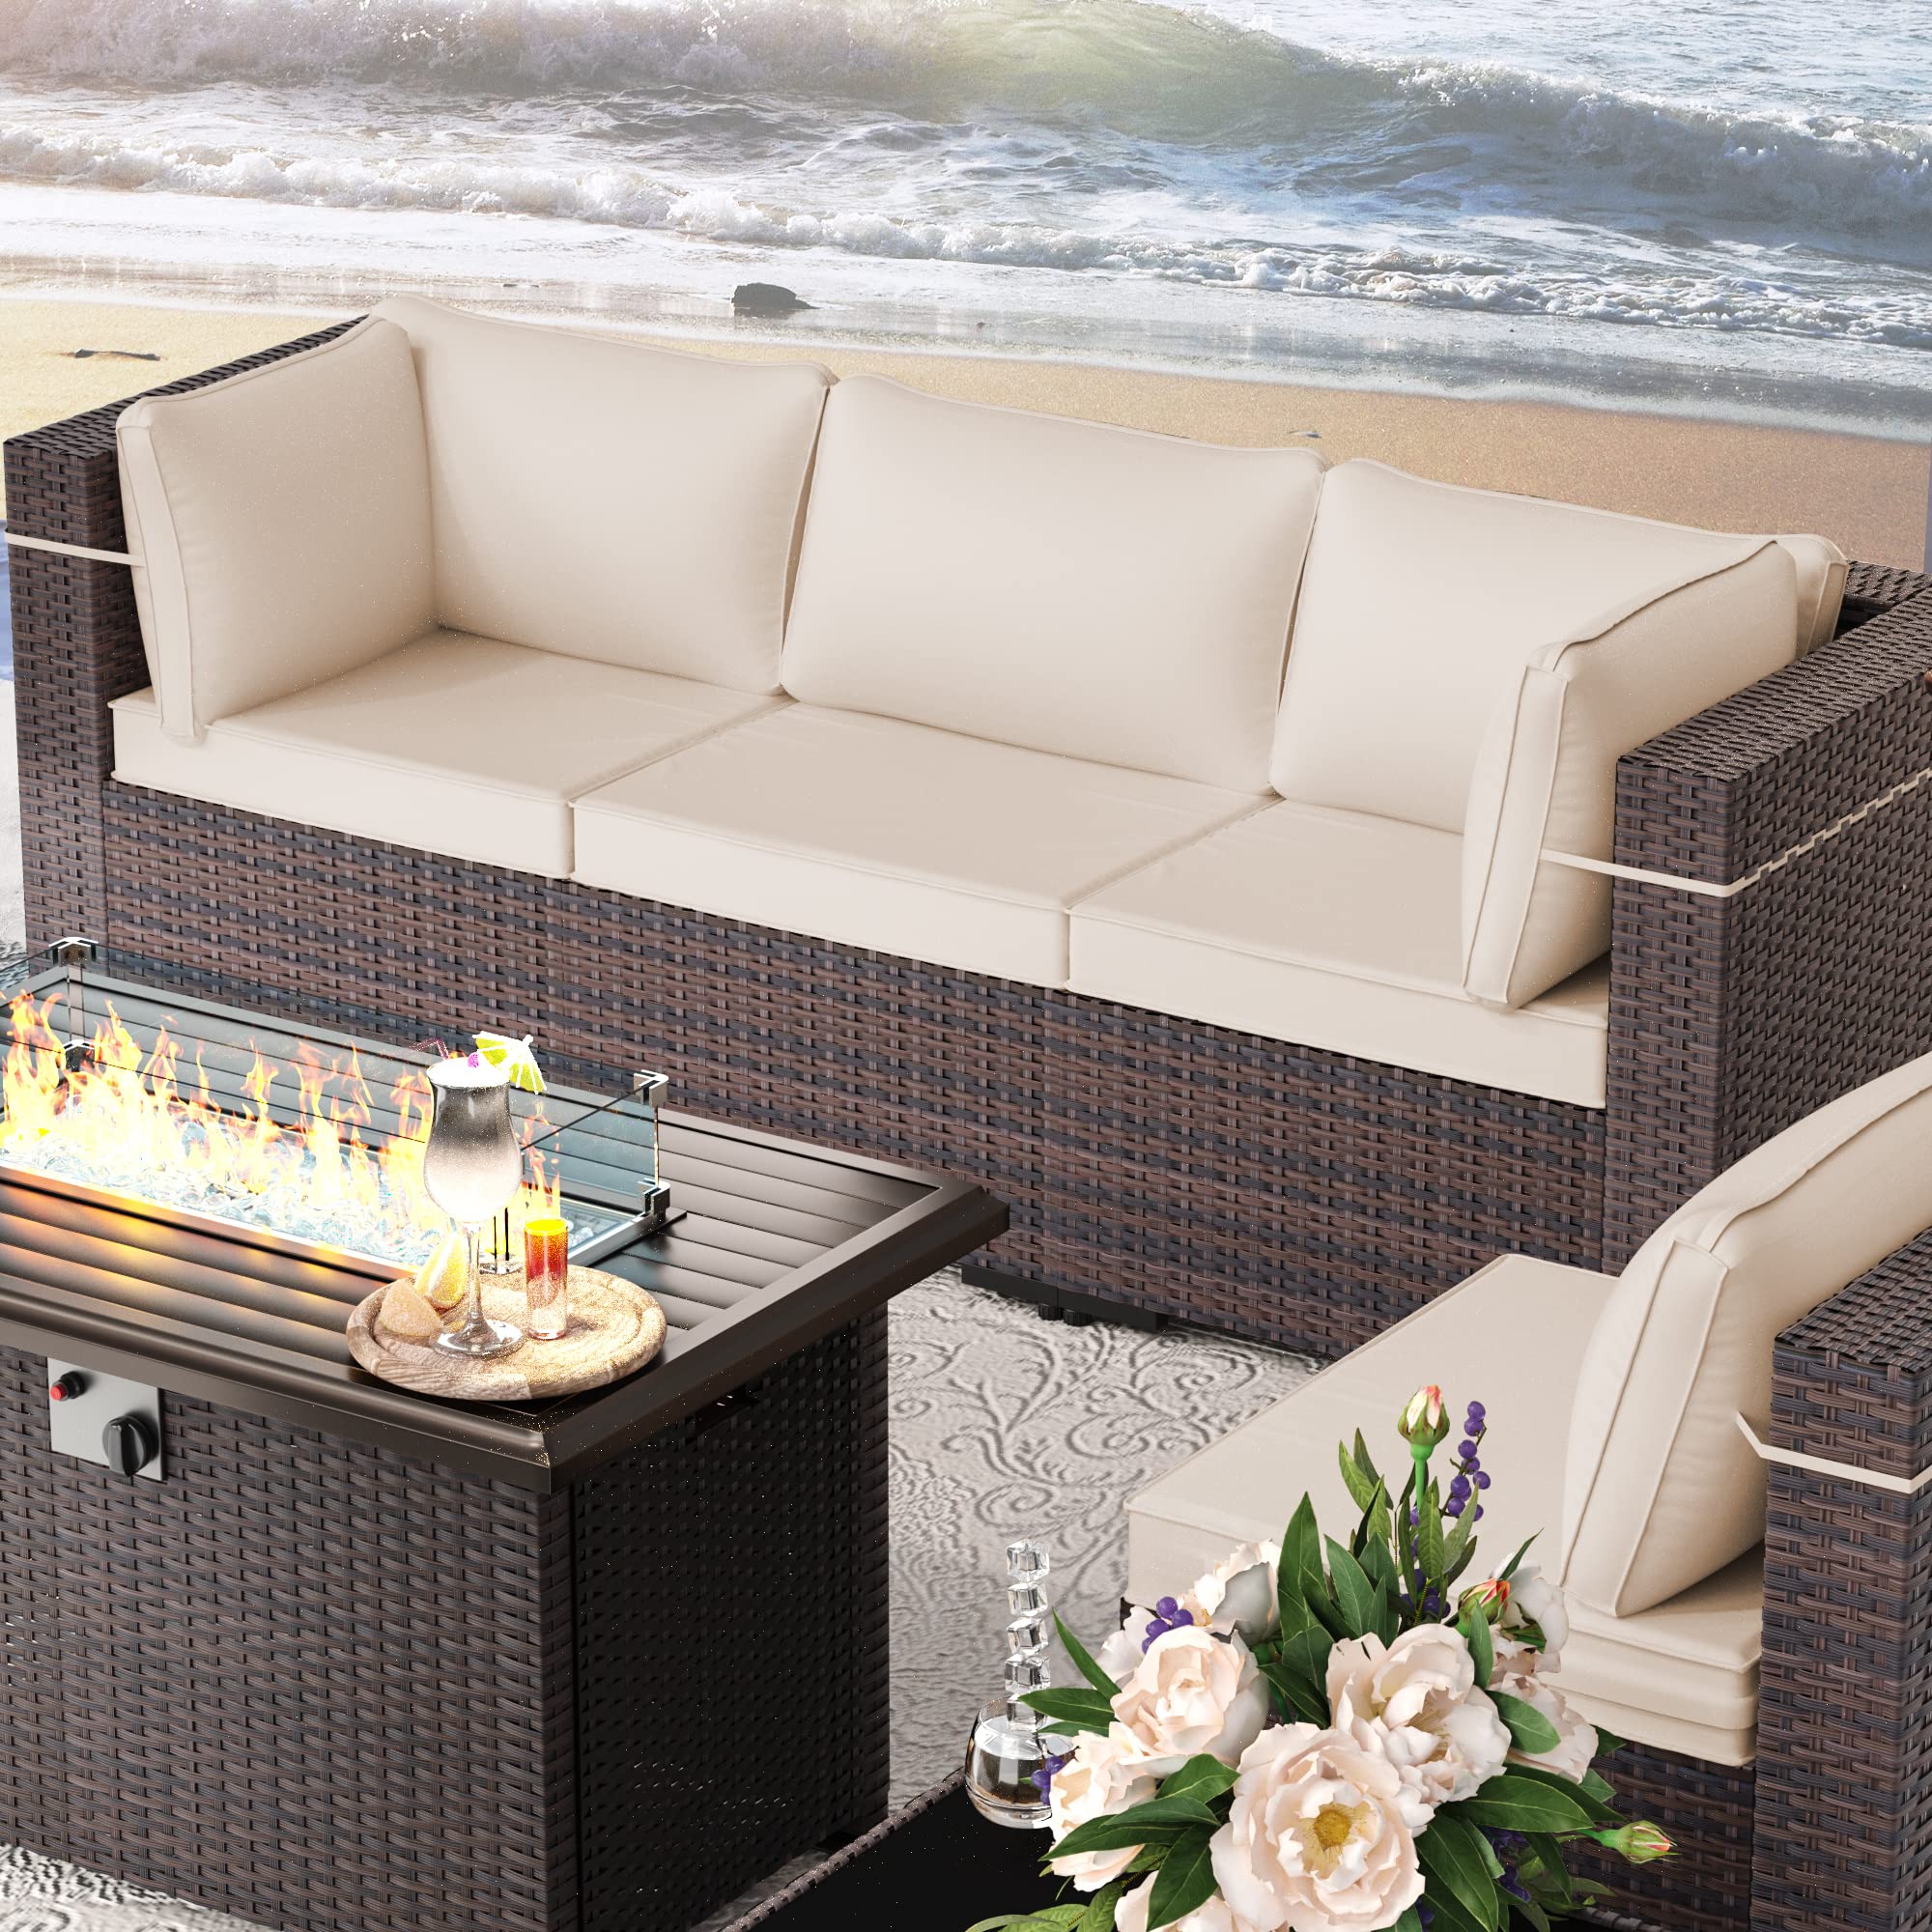 Outdoor Patio Furniture Set with Propane Fire Pit Table, 8 Pieces Outdoor Furniture